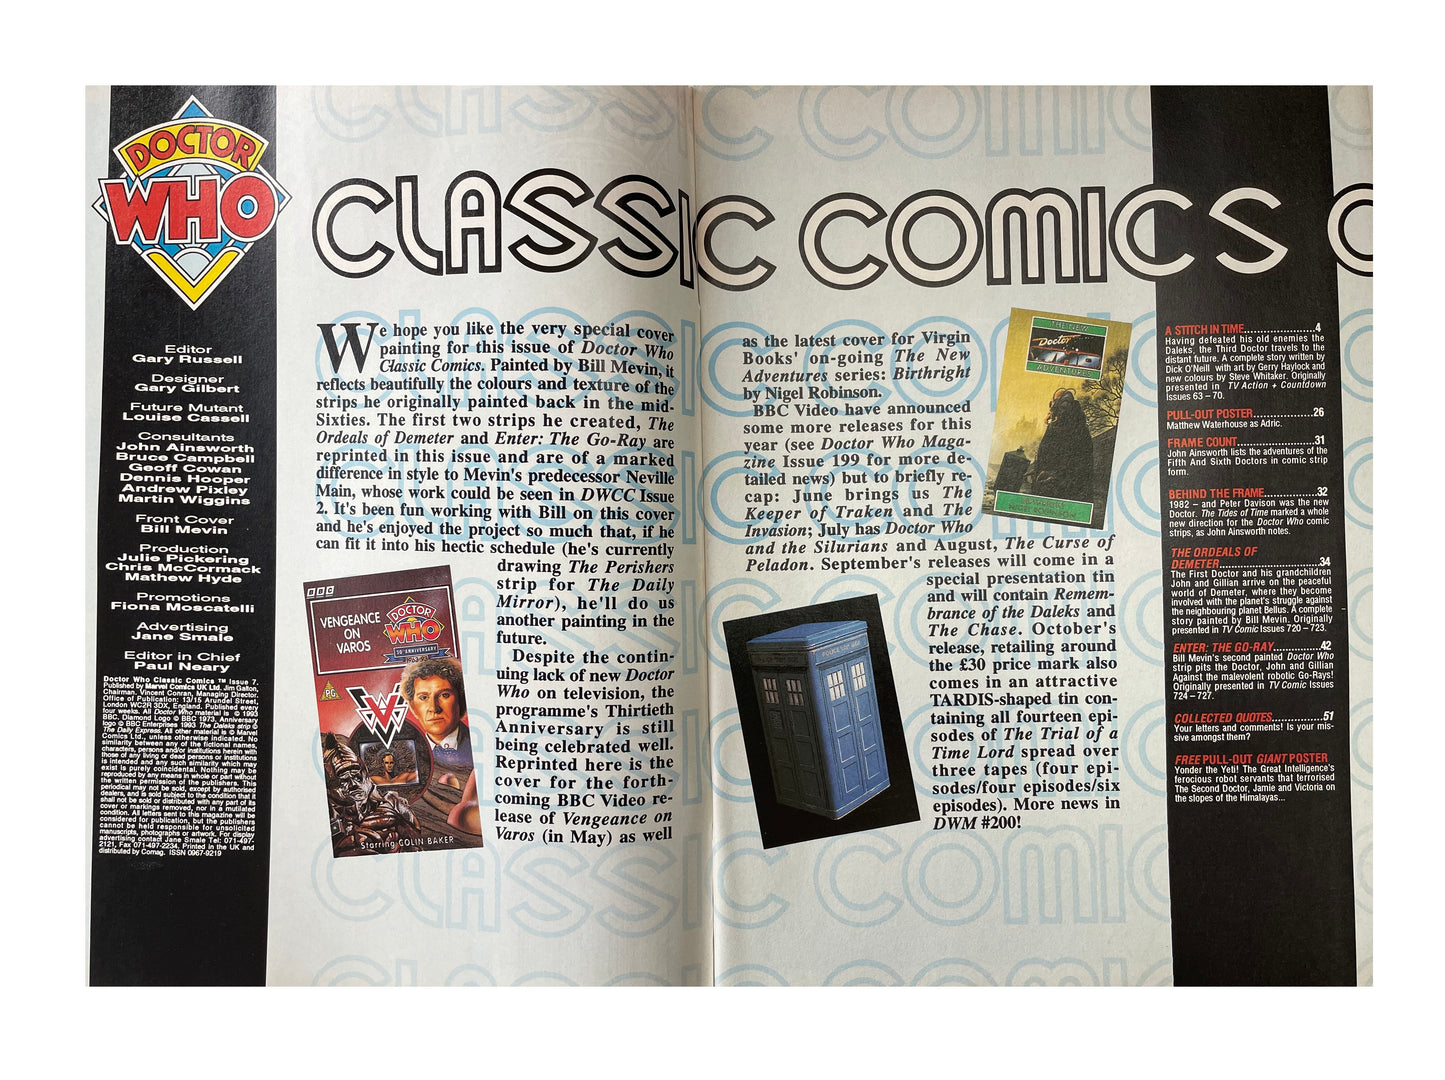 Vintage 1993 Marvels Doctor Dr Who Classic Comics Full Colour Issue 7 Comic 26th May 1993 - Brand New Shop Stock Room Find